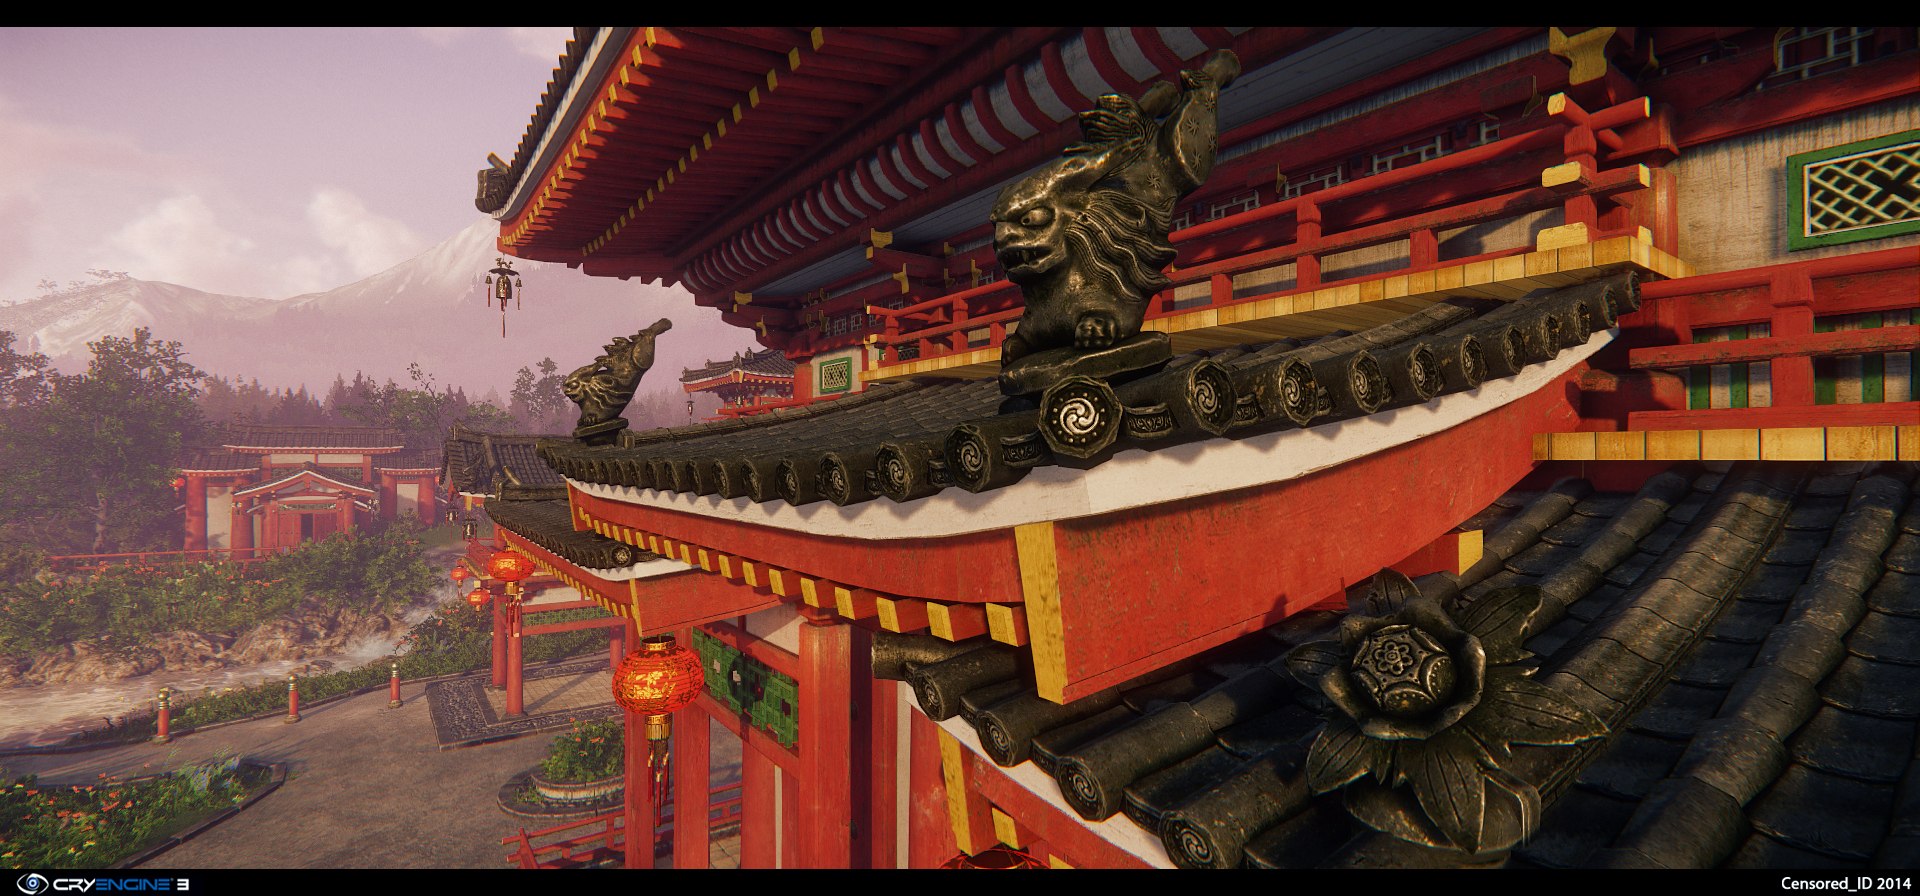 I Haven’t Seen A Temple This Beautiful Since The Shadow Warrior Reboot